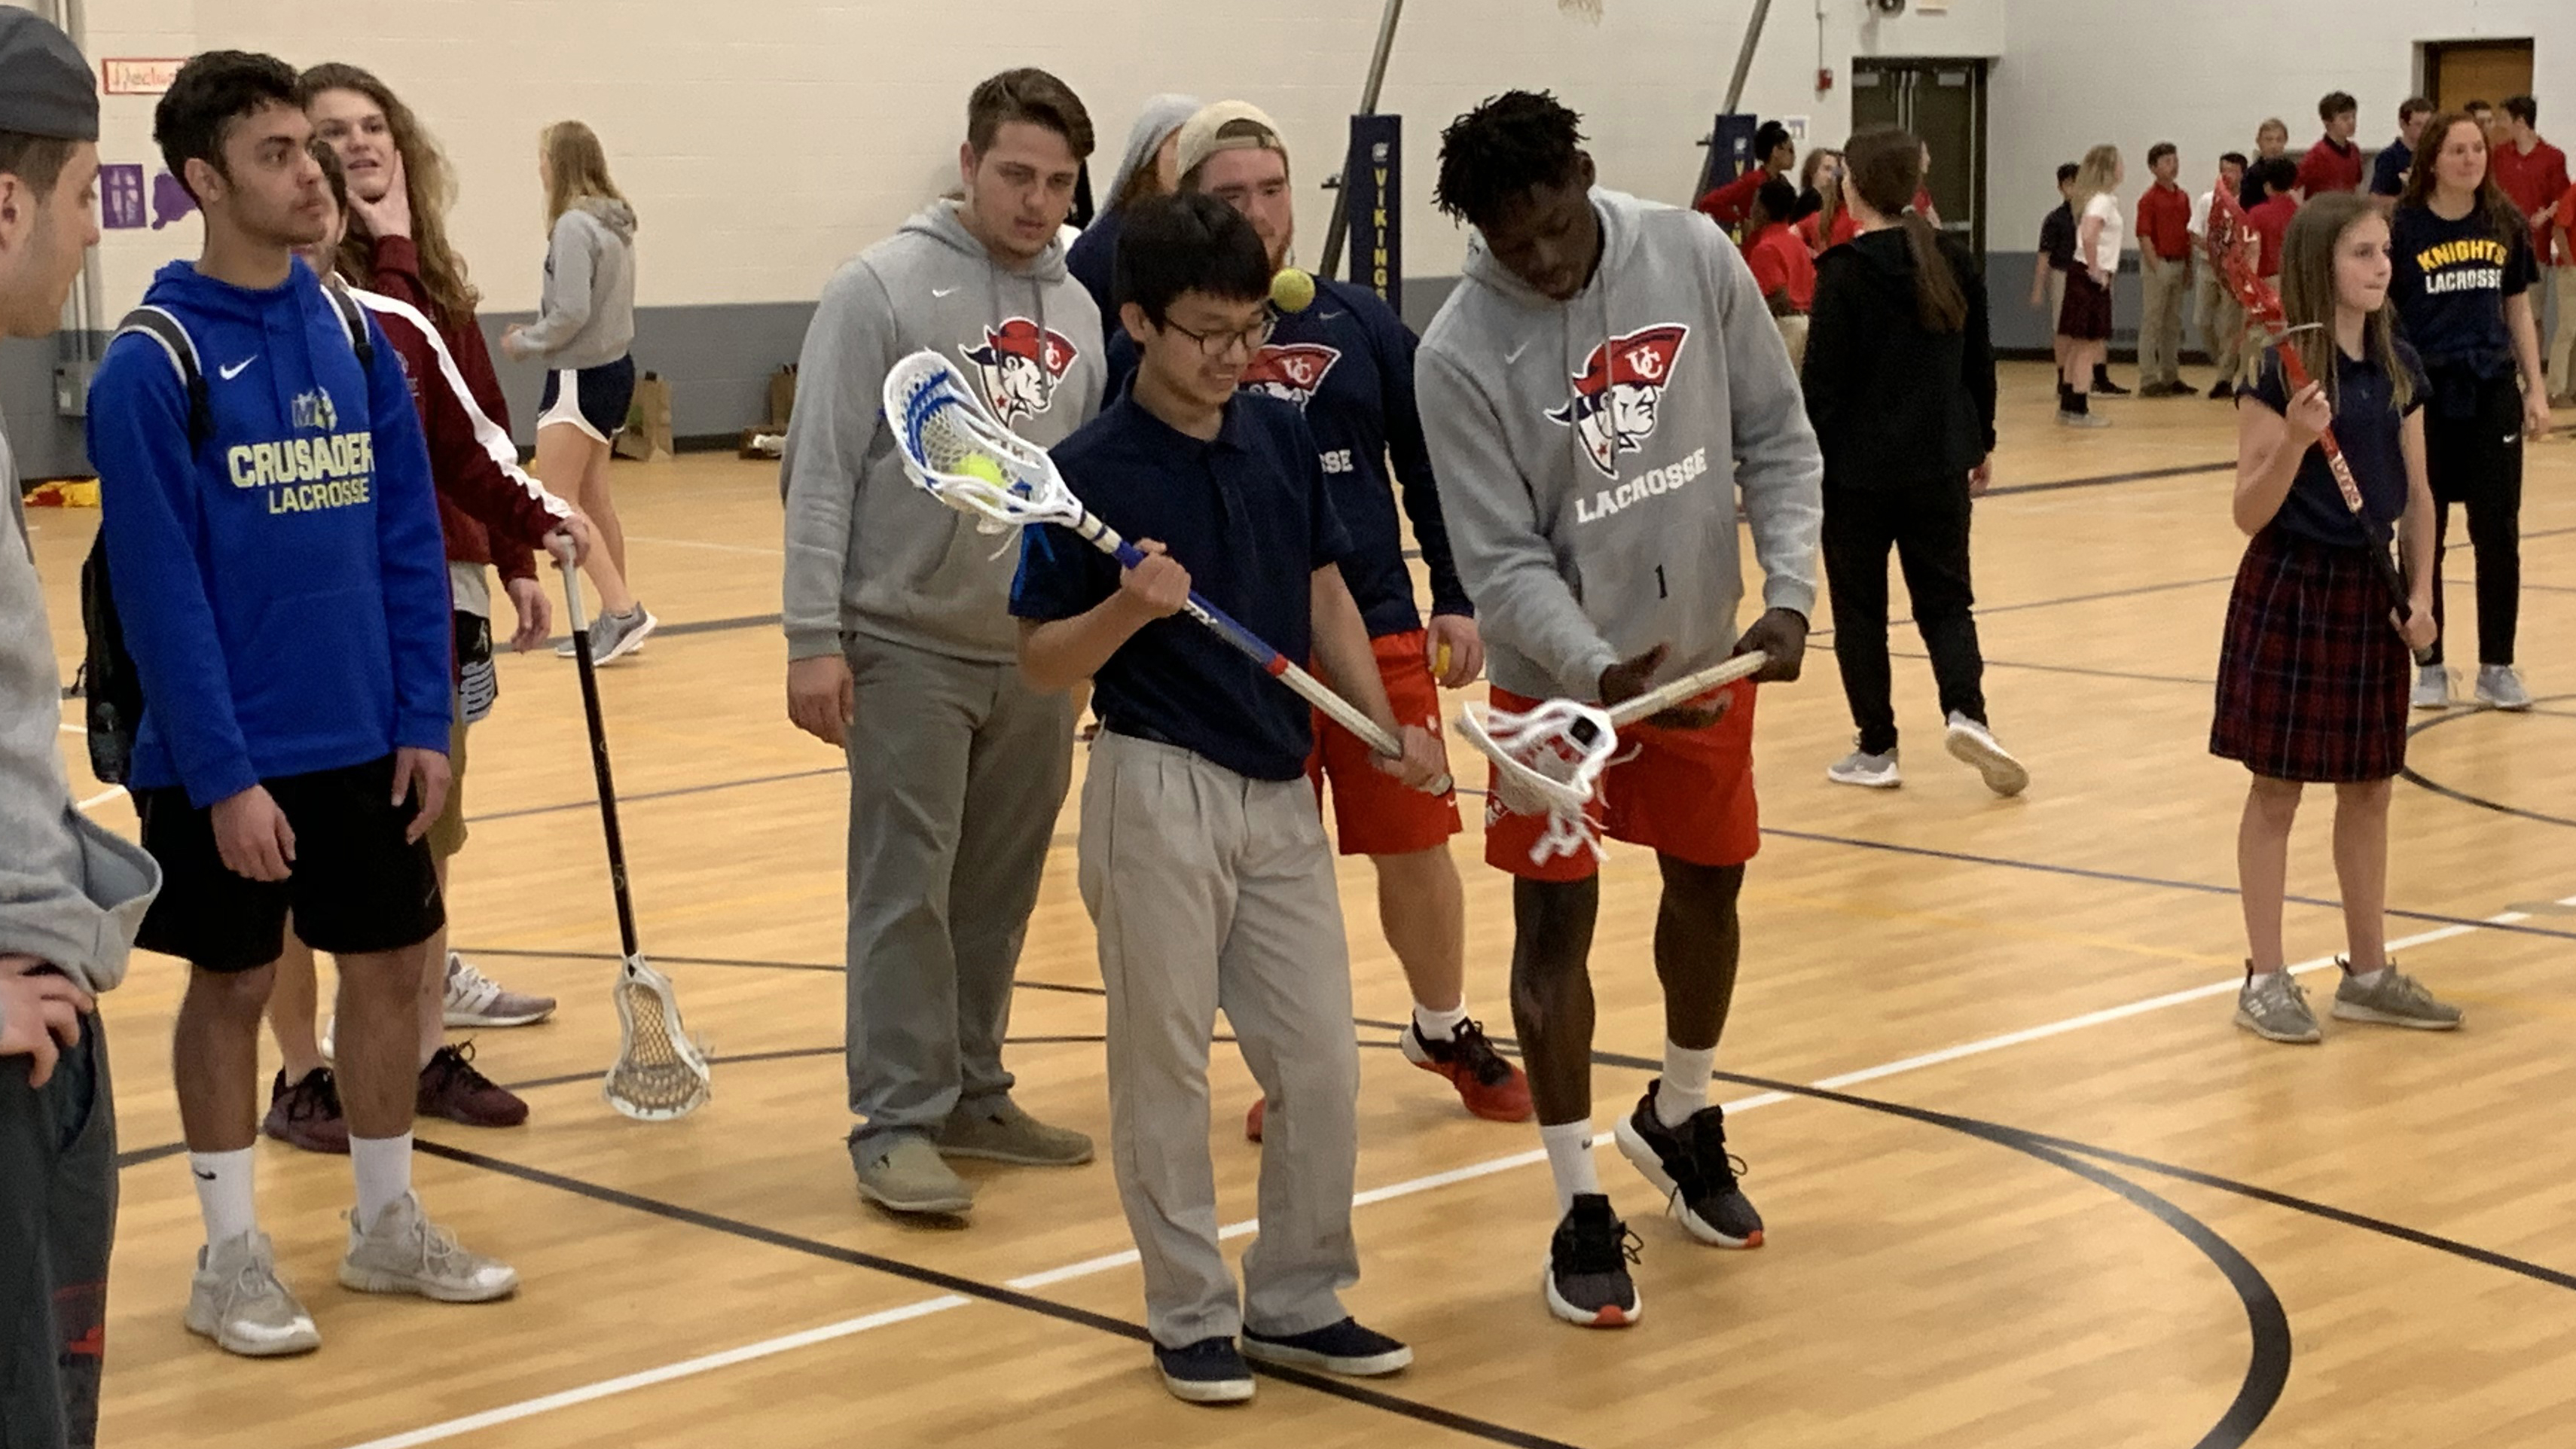 2019 Lacrosse Teaming Up for Character Event?